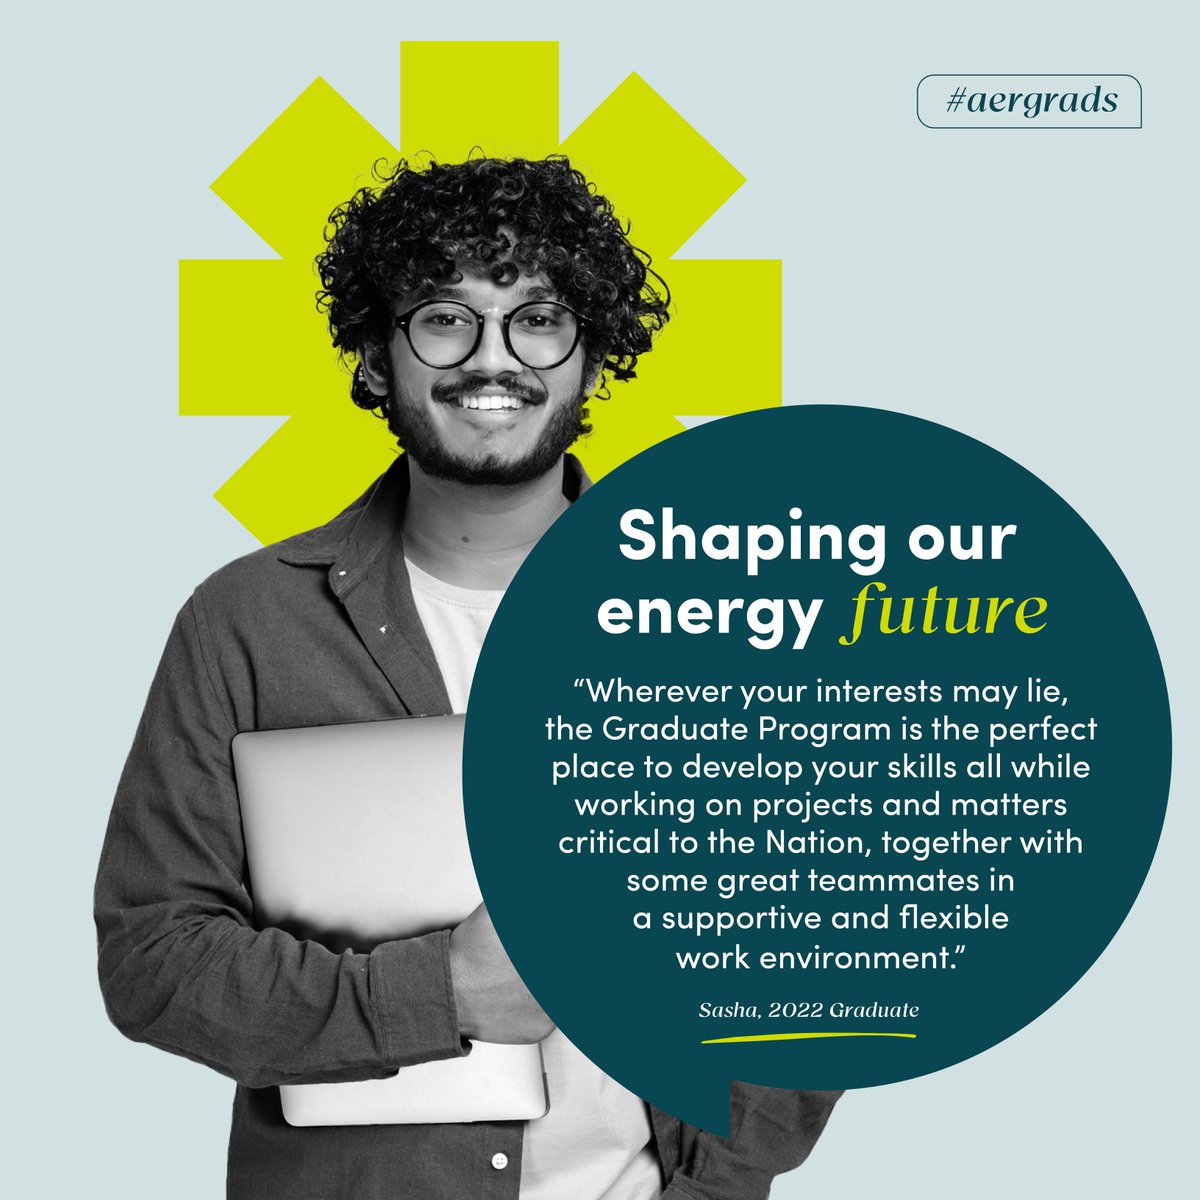 Kick-start your career and put yourself at the heart of shaping Australia’s energy future – apply for the AER 2025 Graduate Program! ⚡ Find out more: lnkd.in/gPswNn9a

#GraduateJobs #APSJobs #PublicService #Employment #GradProgram #WeAreAER #Energy #Hiring